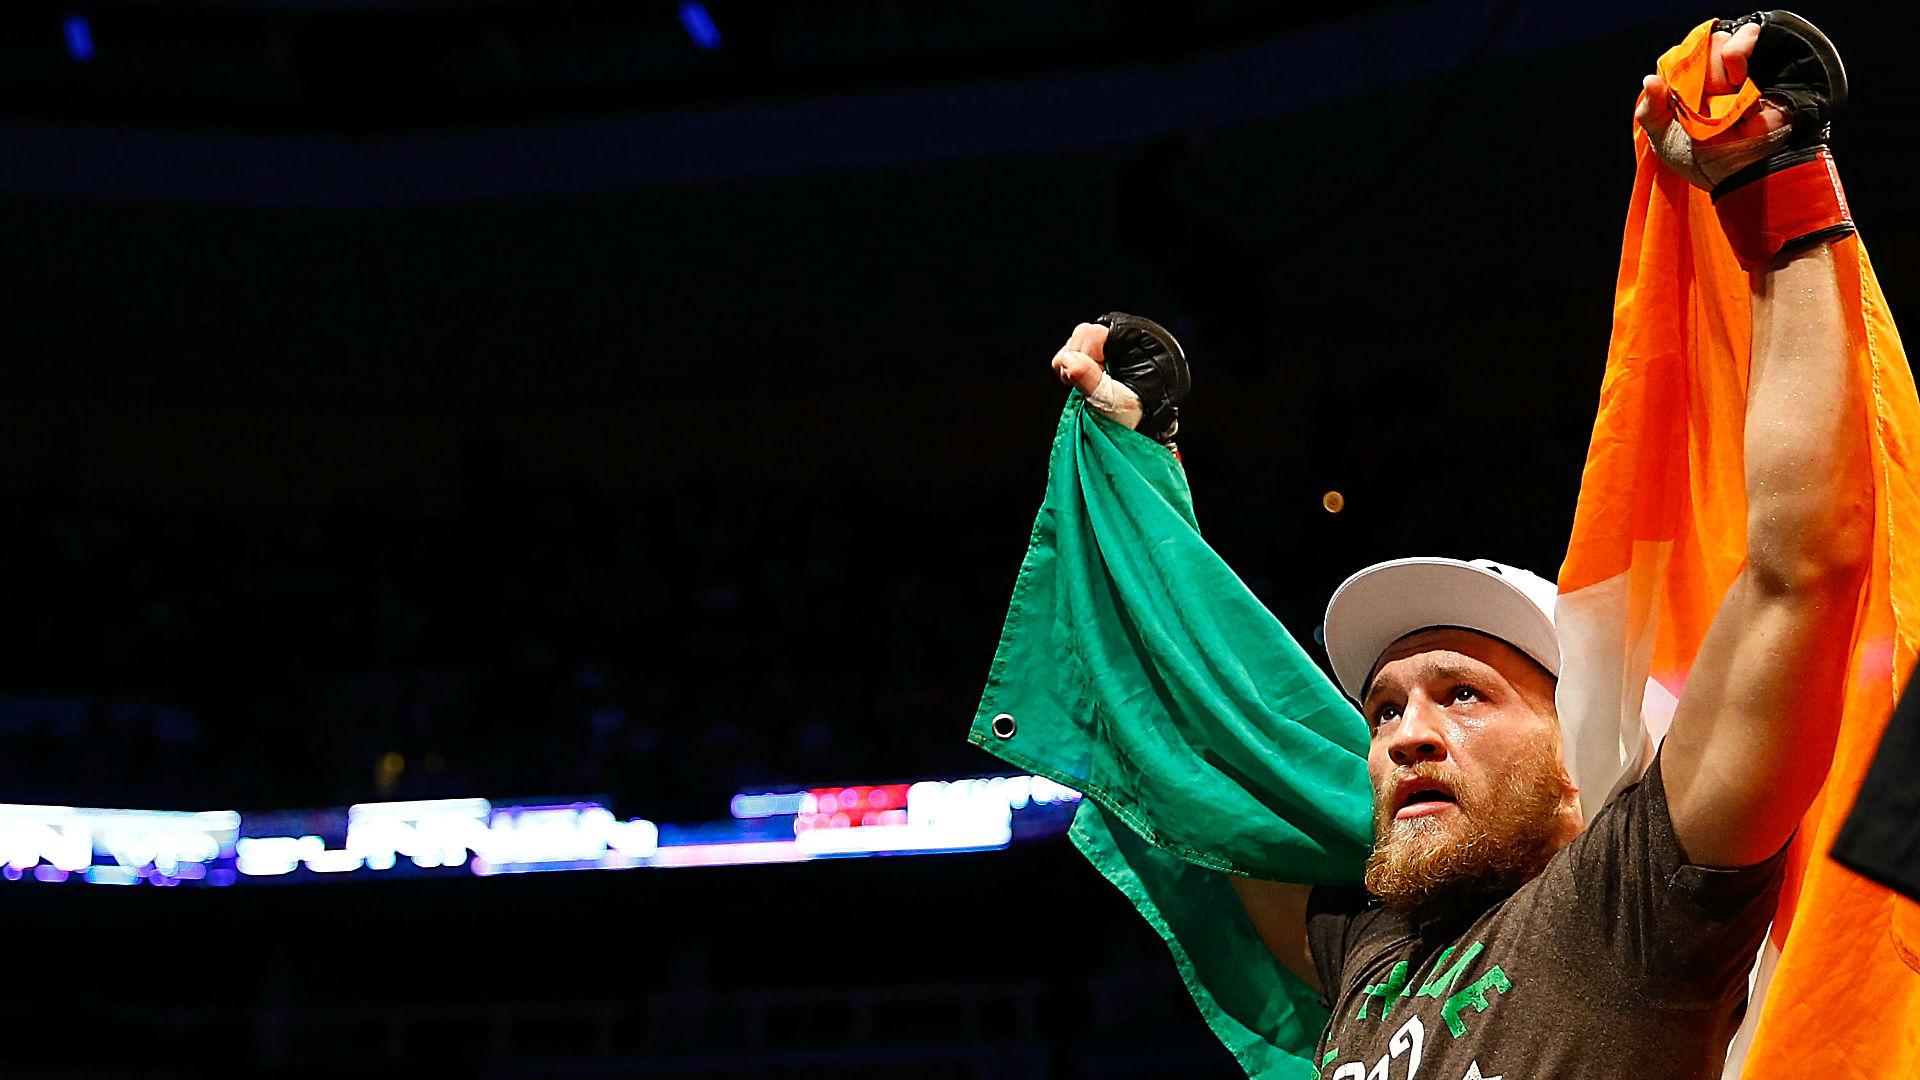 WWE star Sheamus got into a Twitter war with UFC star Conor